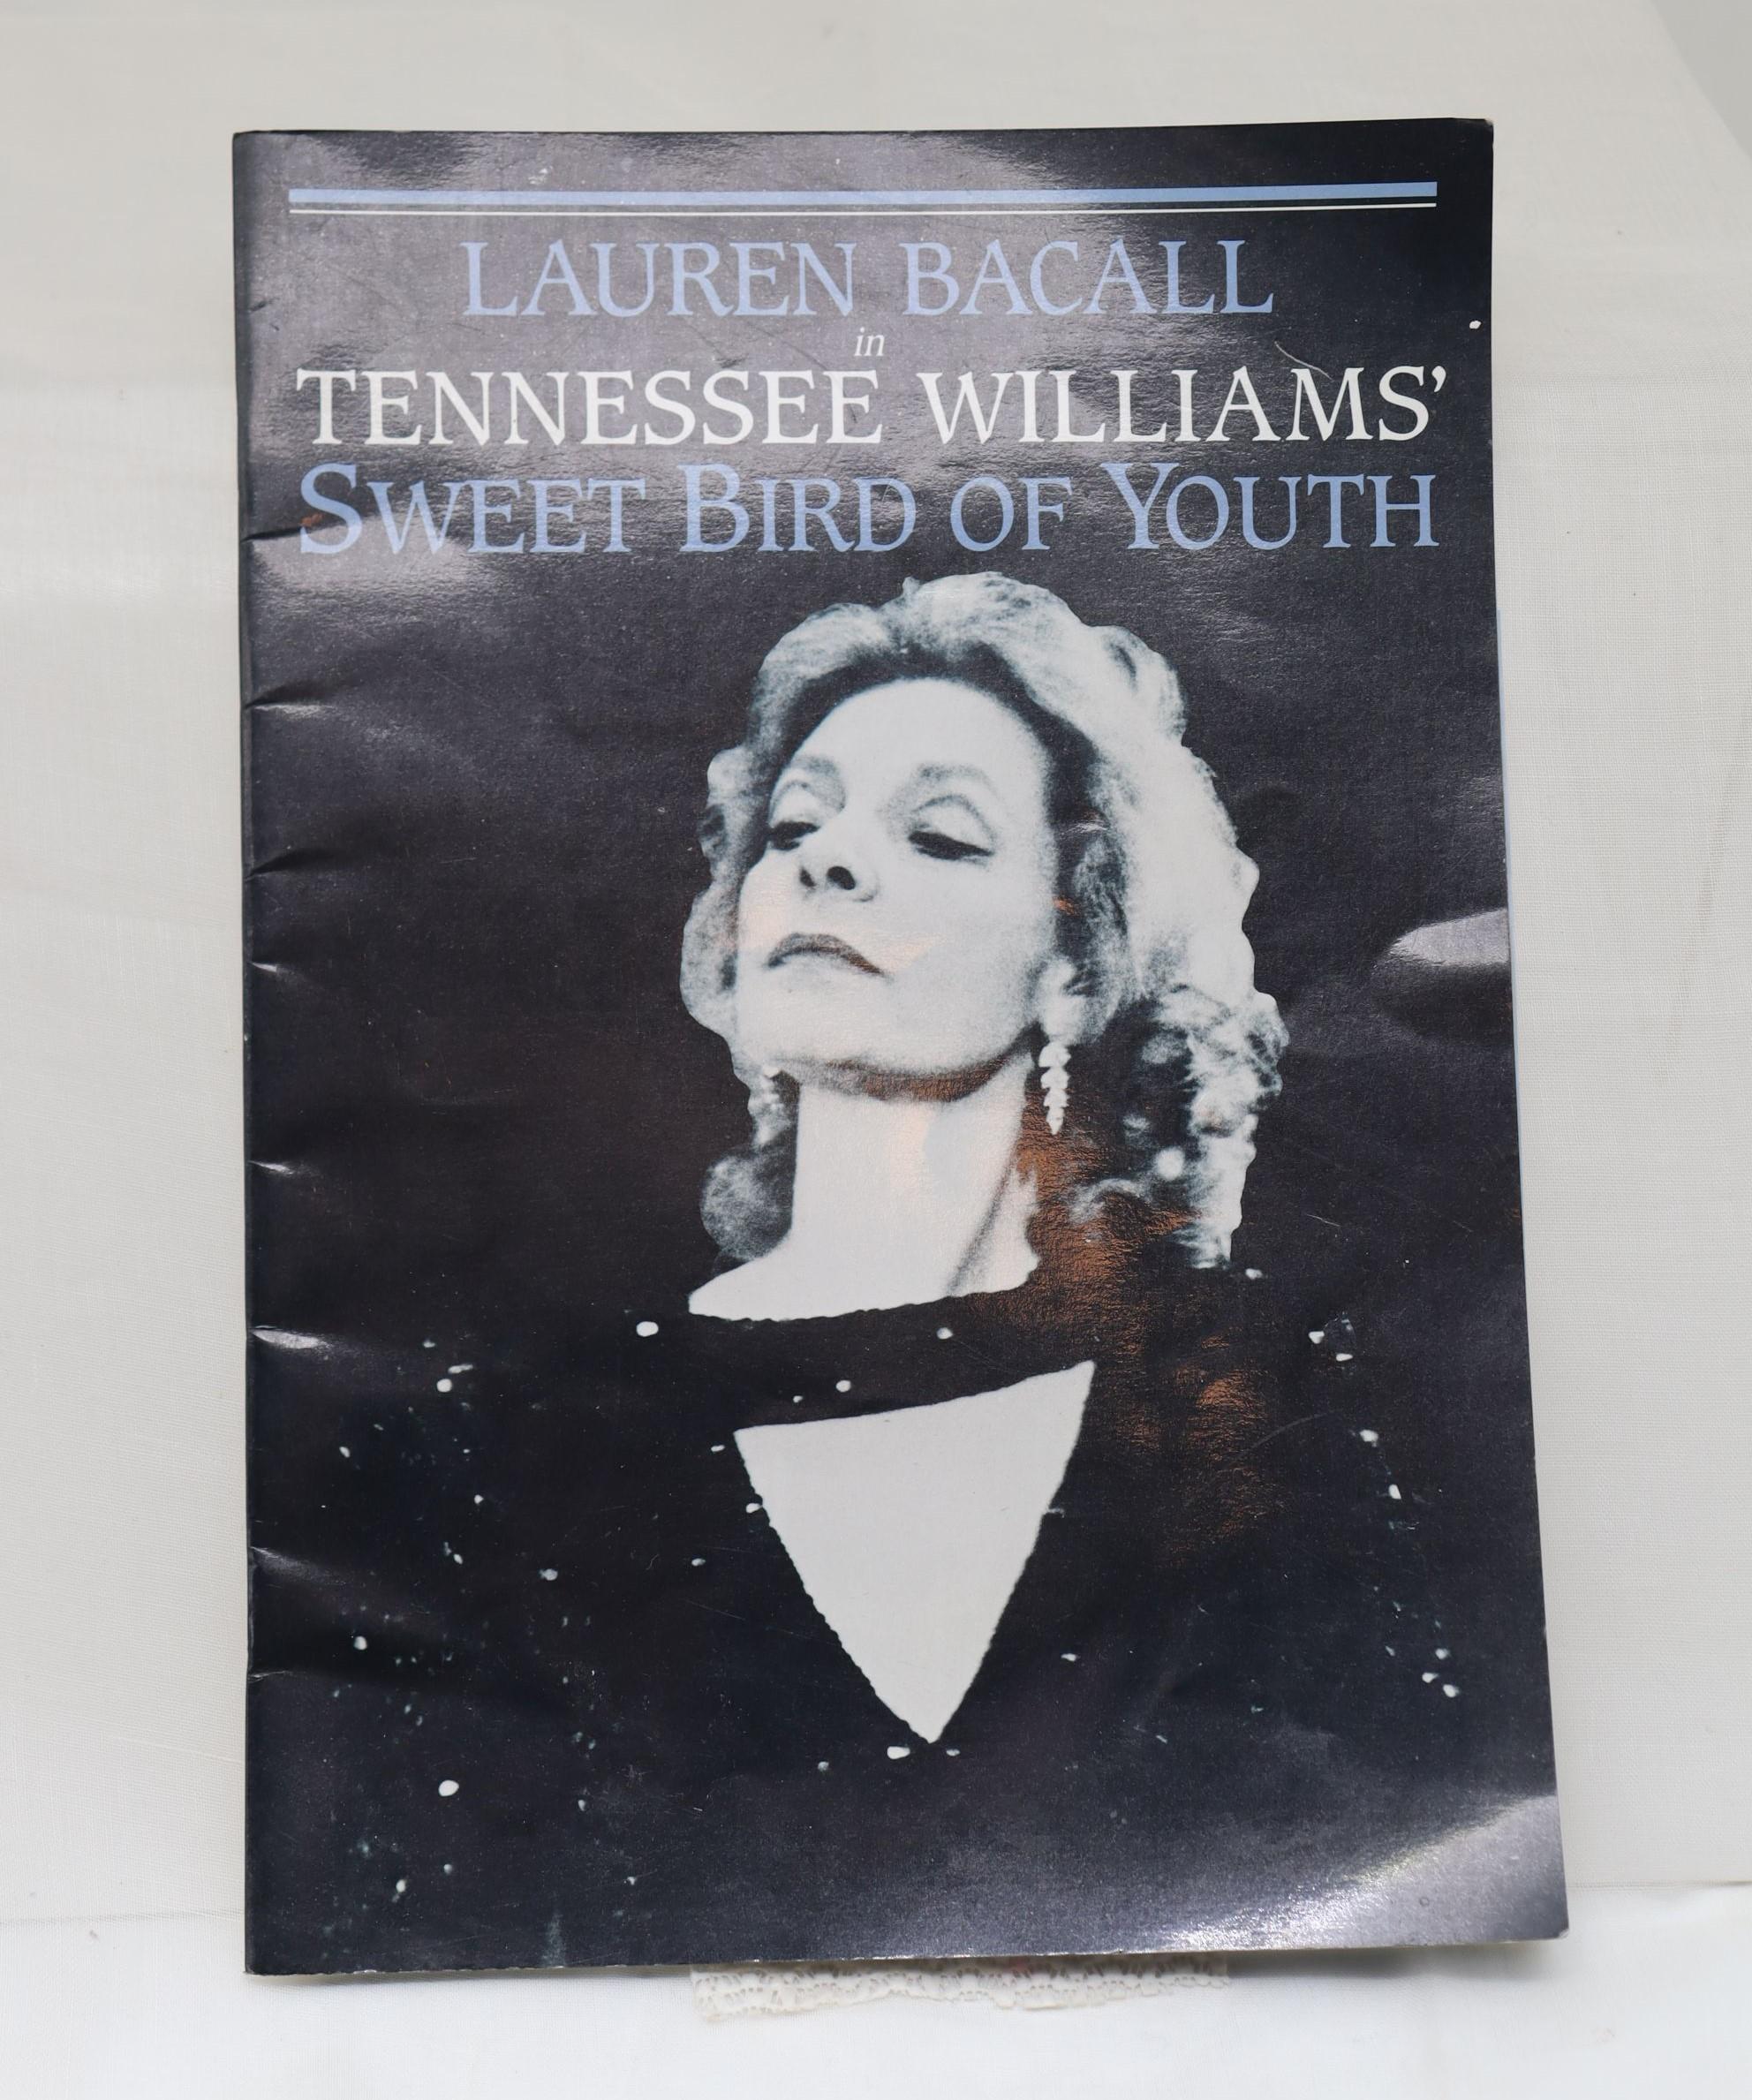 This program was autographed by Lauren Bacall (1924-2014) in Australia in 1986 when she played the part of The Princess Kosmonopolis in Tennessee Williams' play 